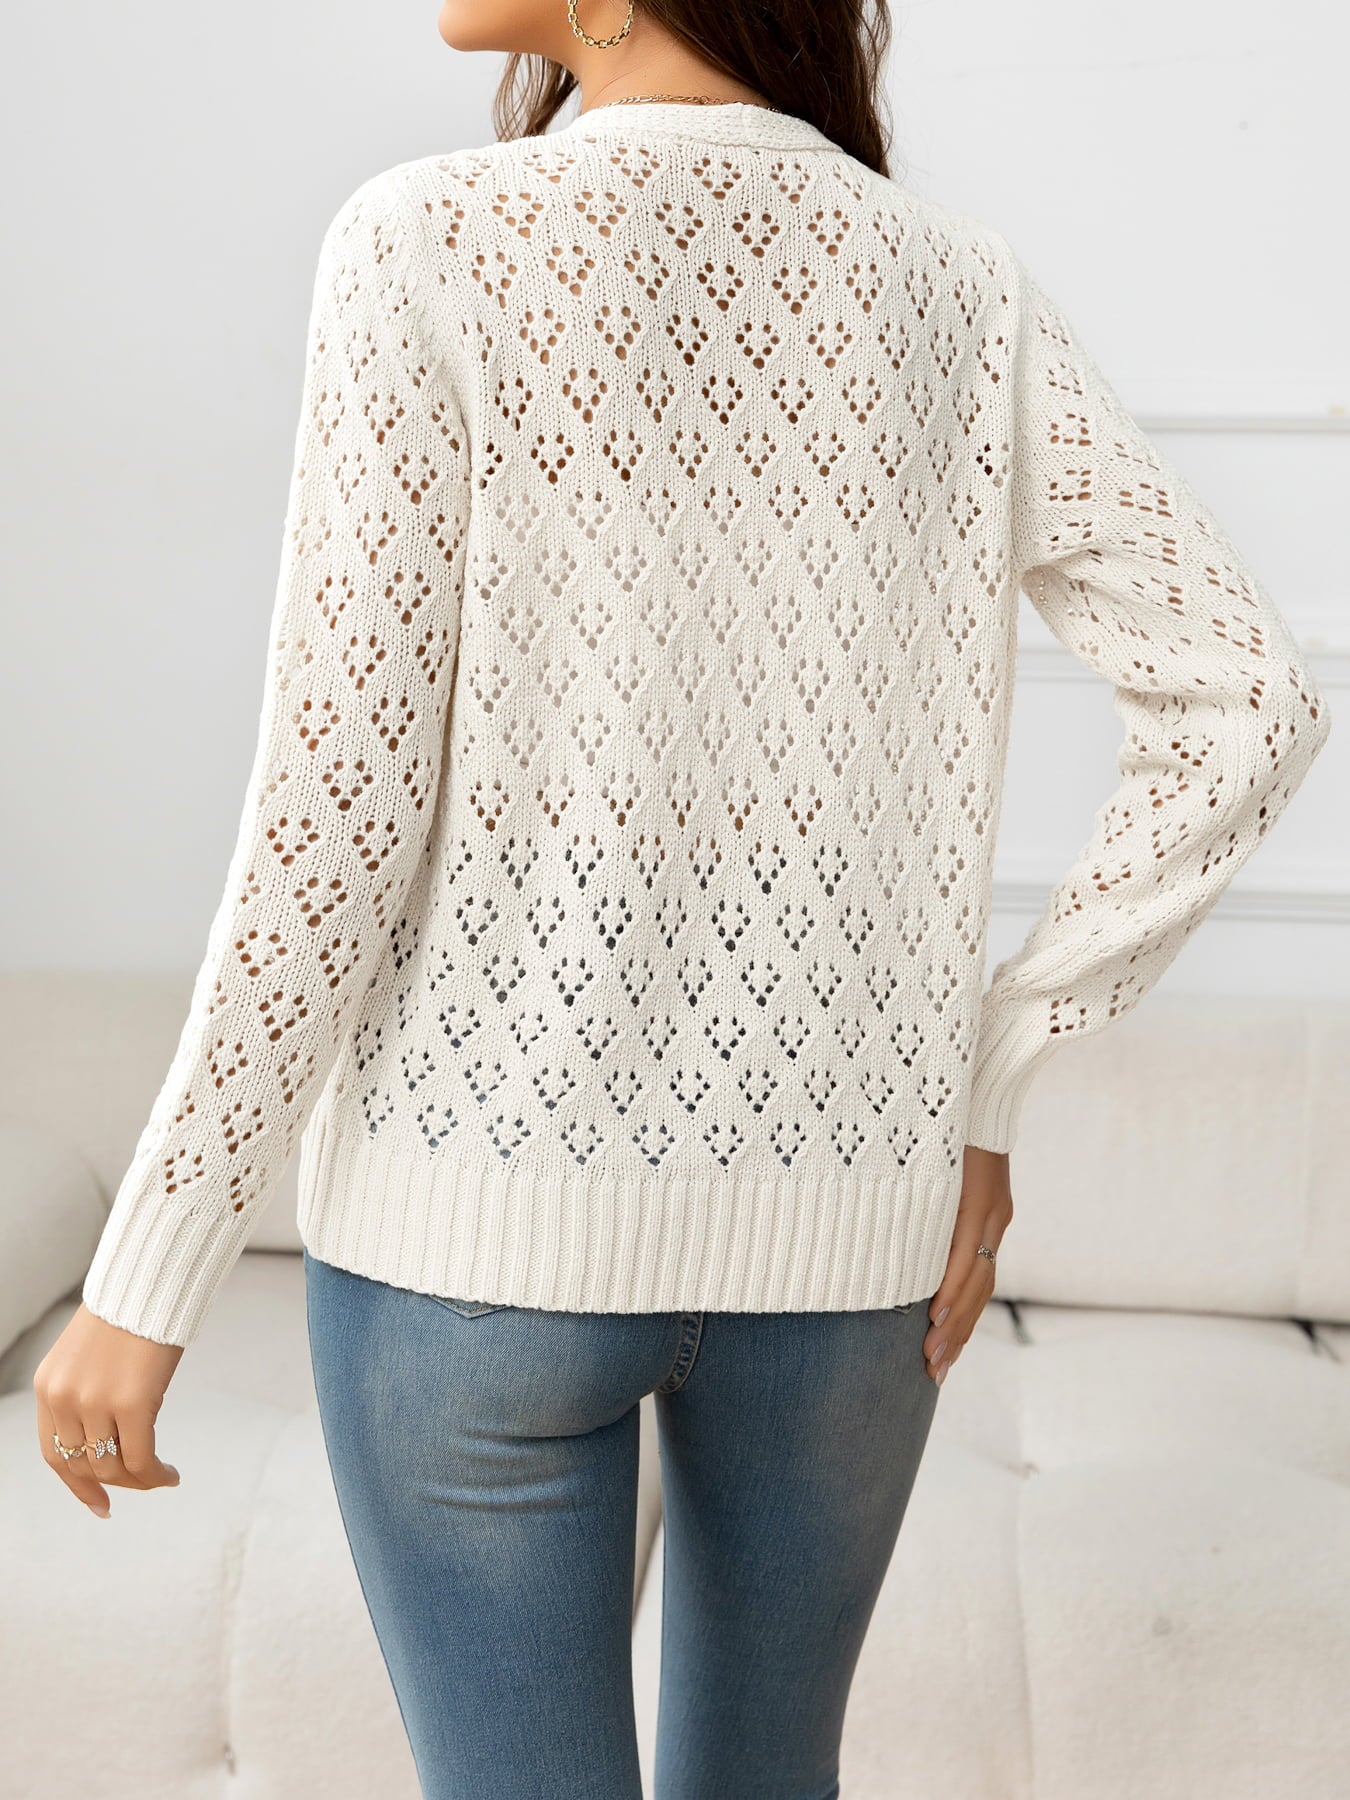 Beauteous Openwork V-Neck Buttoned Knit Top